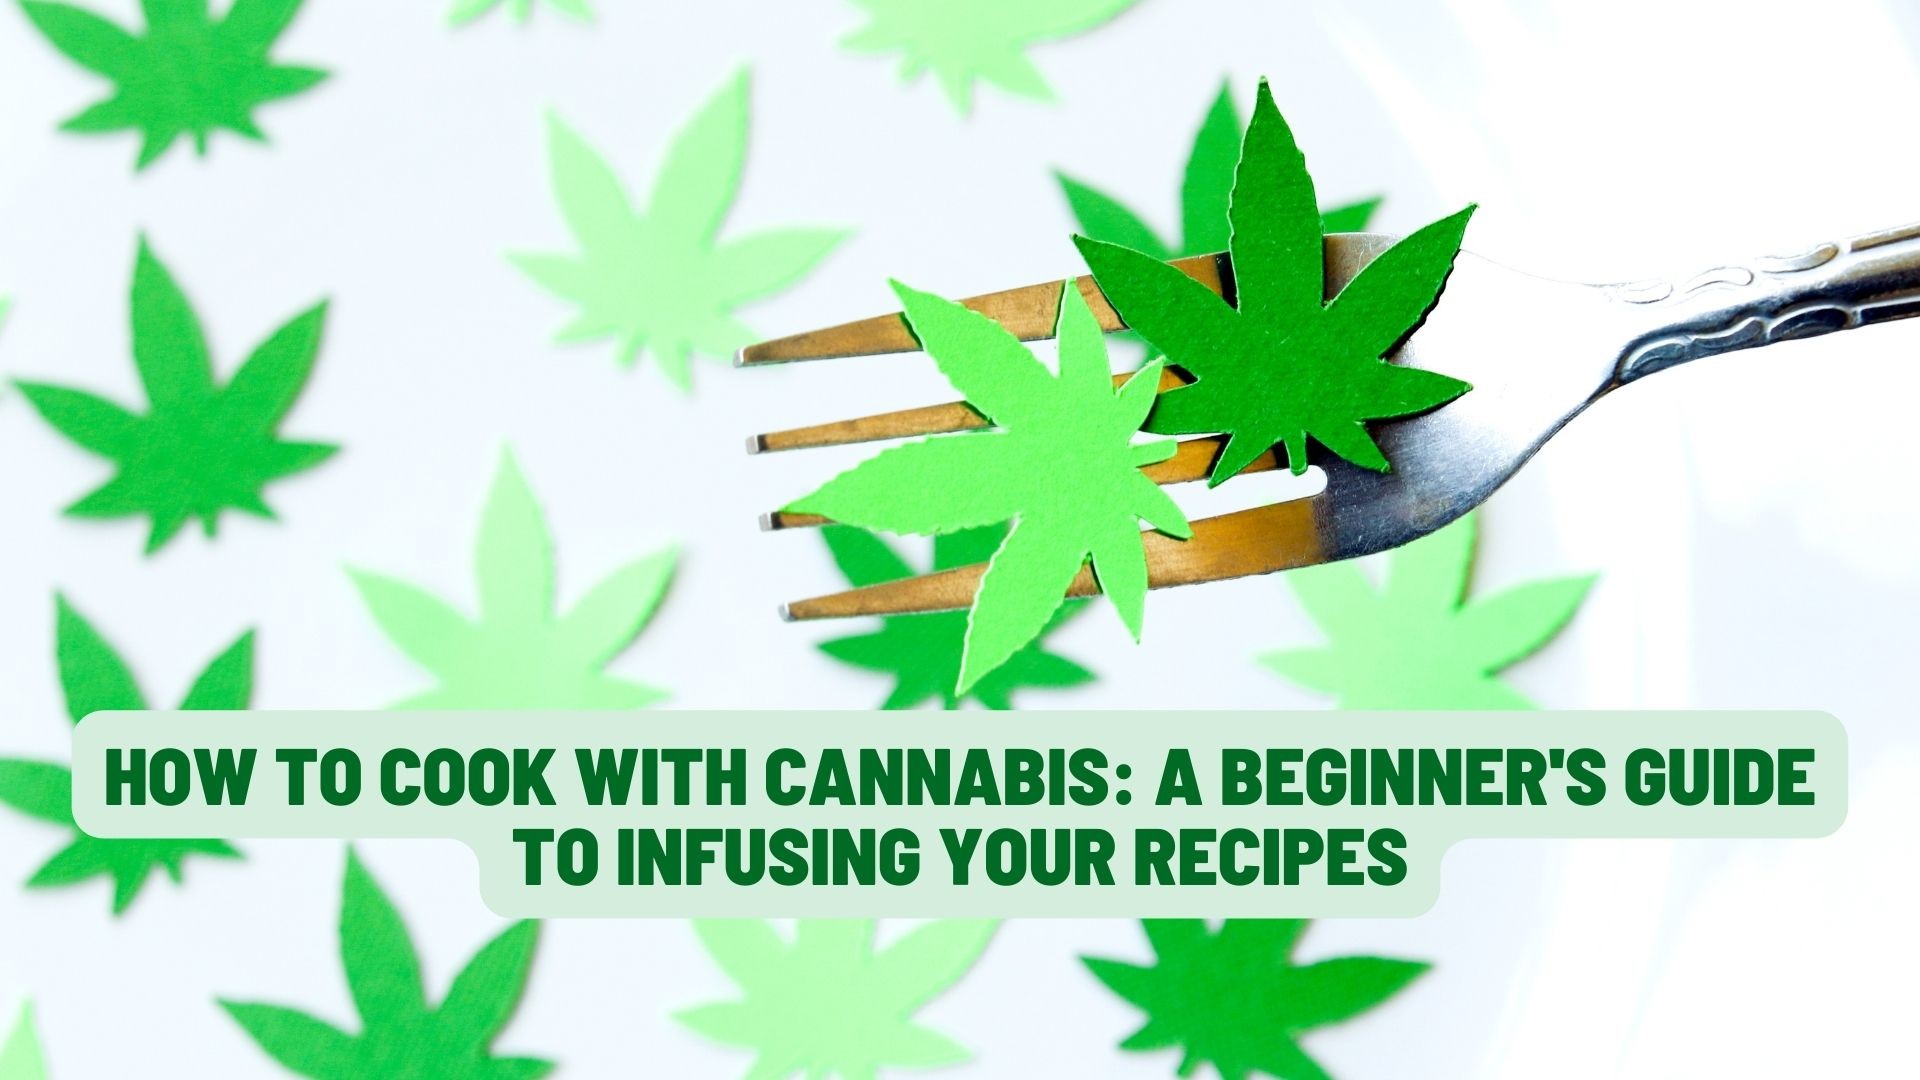 How To Cook With Cannabis: A Beginner's Guide to Infusing Your Recipes